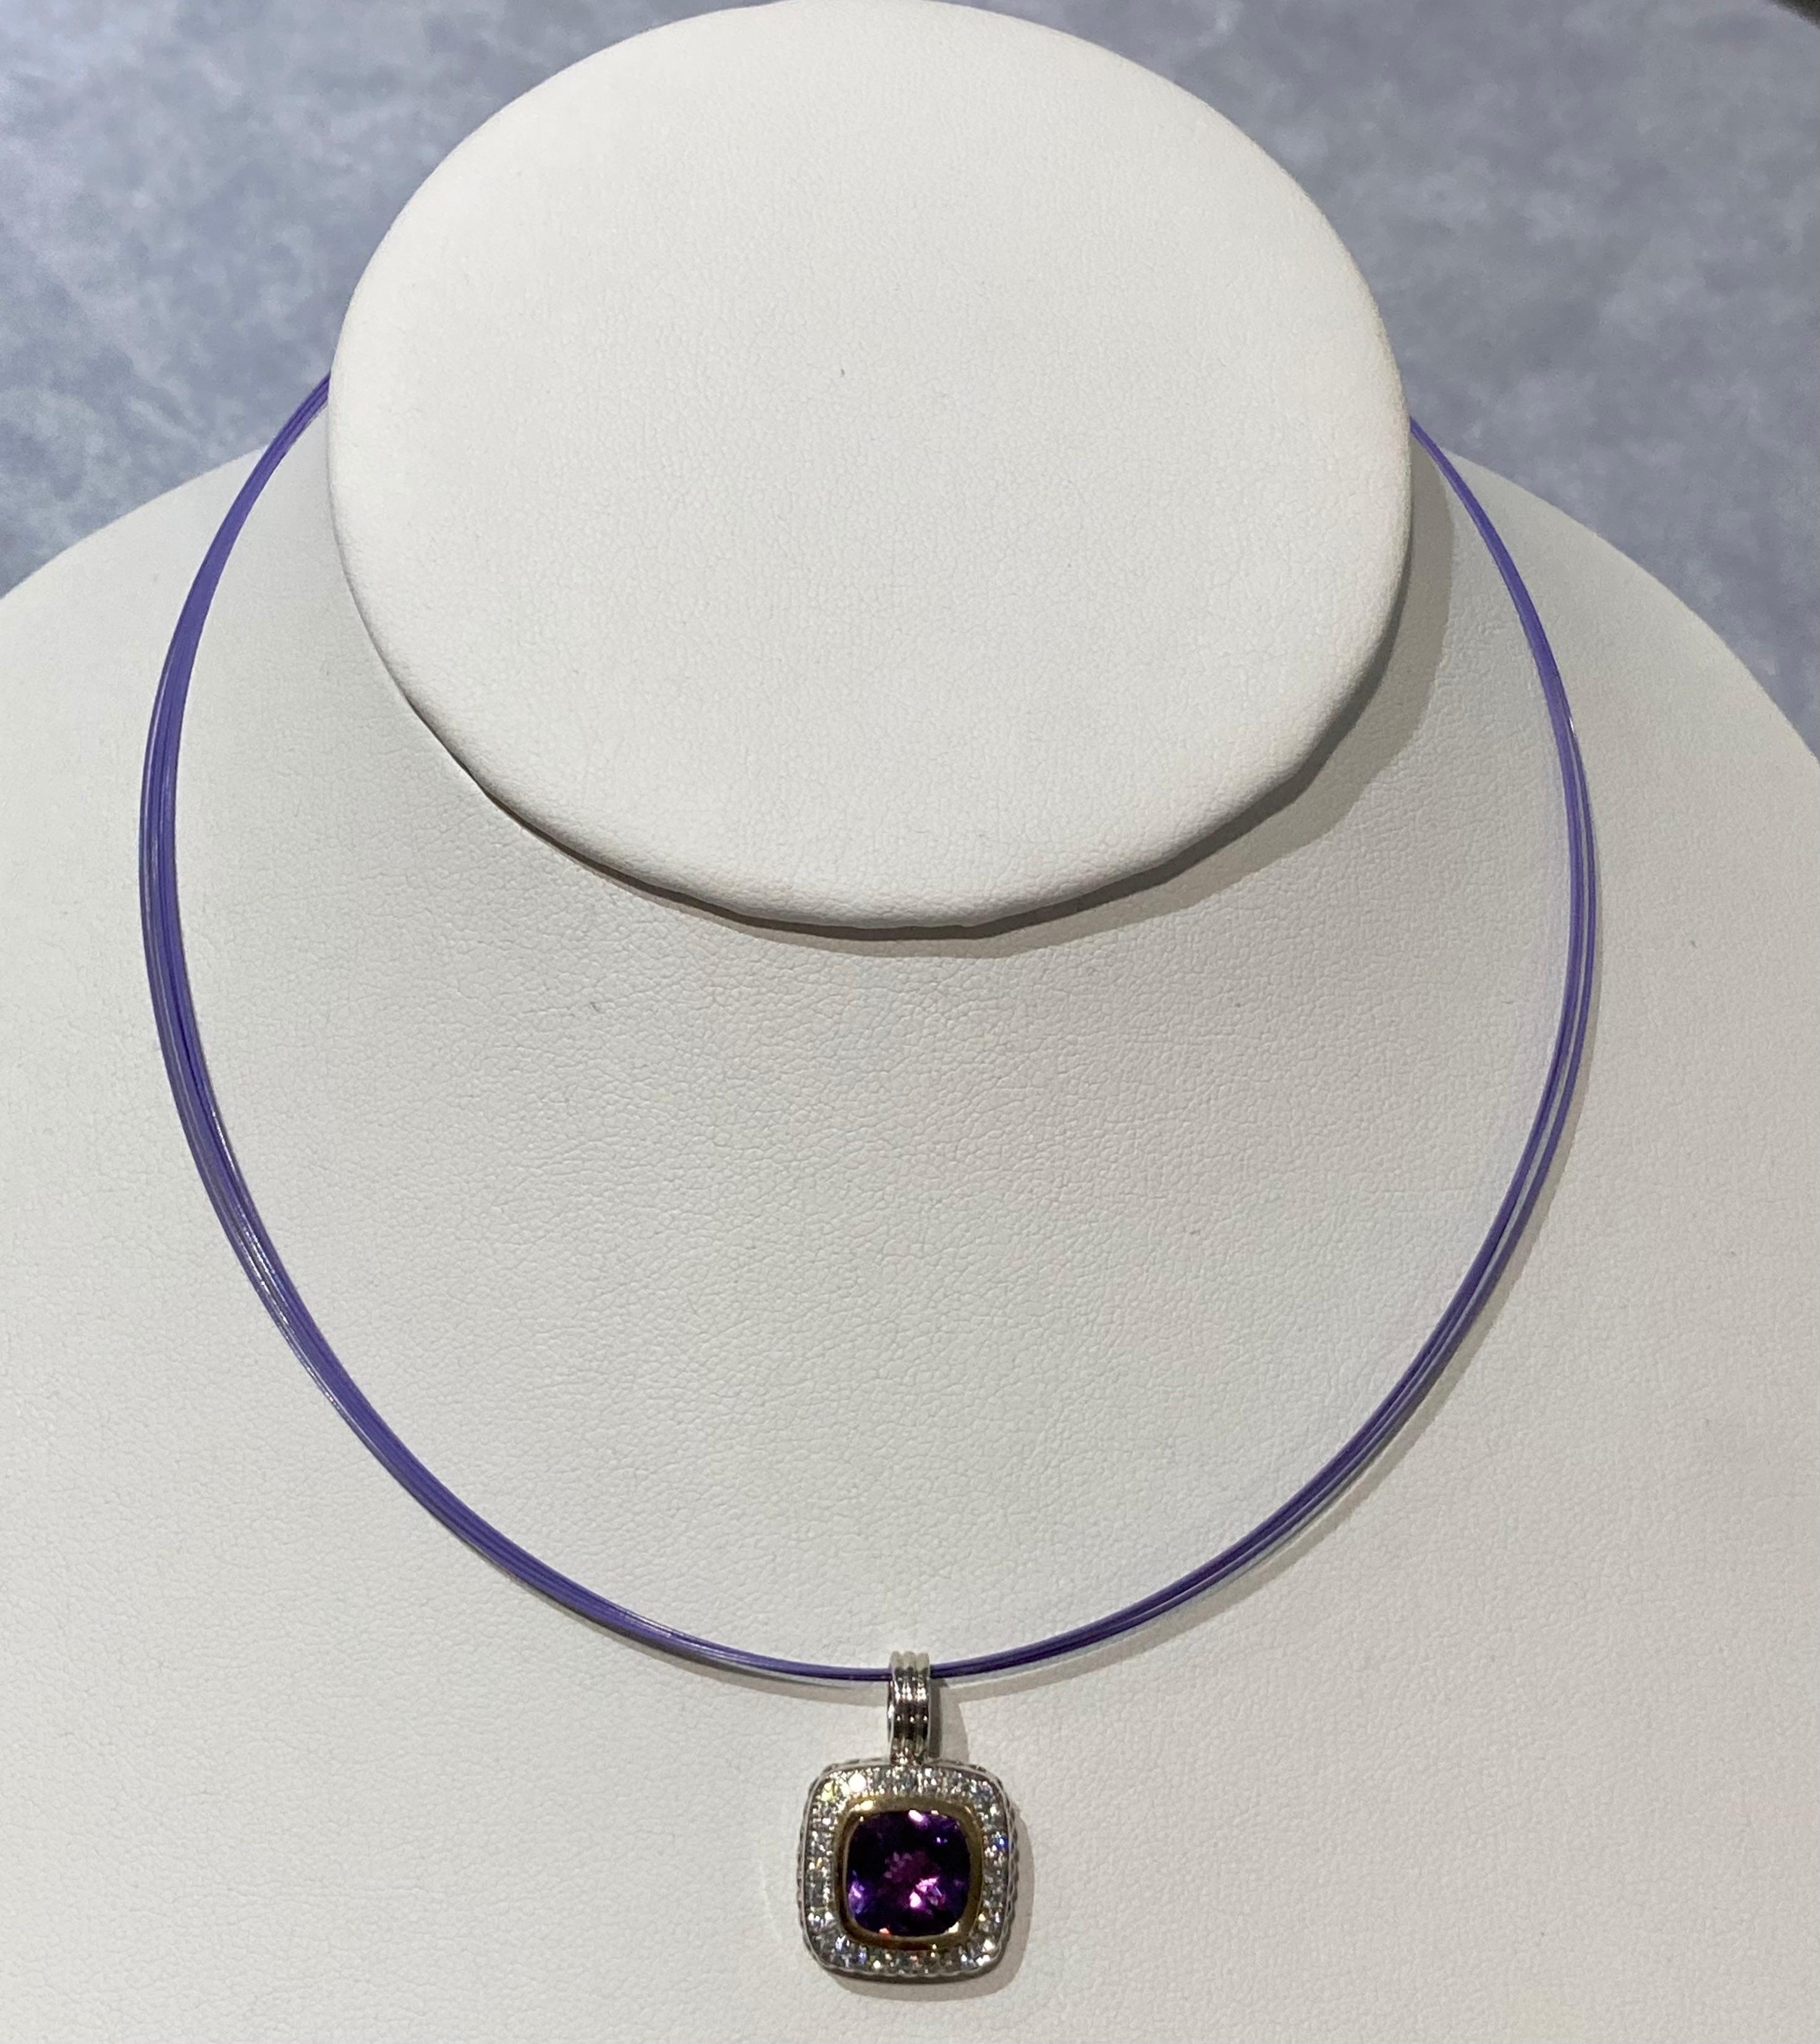 14k white and yellow gold amethyst and diamond necklace on a purple wire multi strand cable necklace with a 14k white gold clasp.  The diamonds are F color and VS clarity and total a weight of 0.50cts.